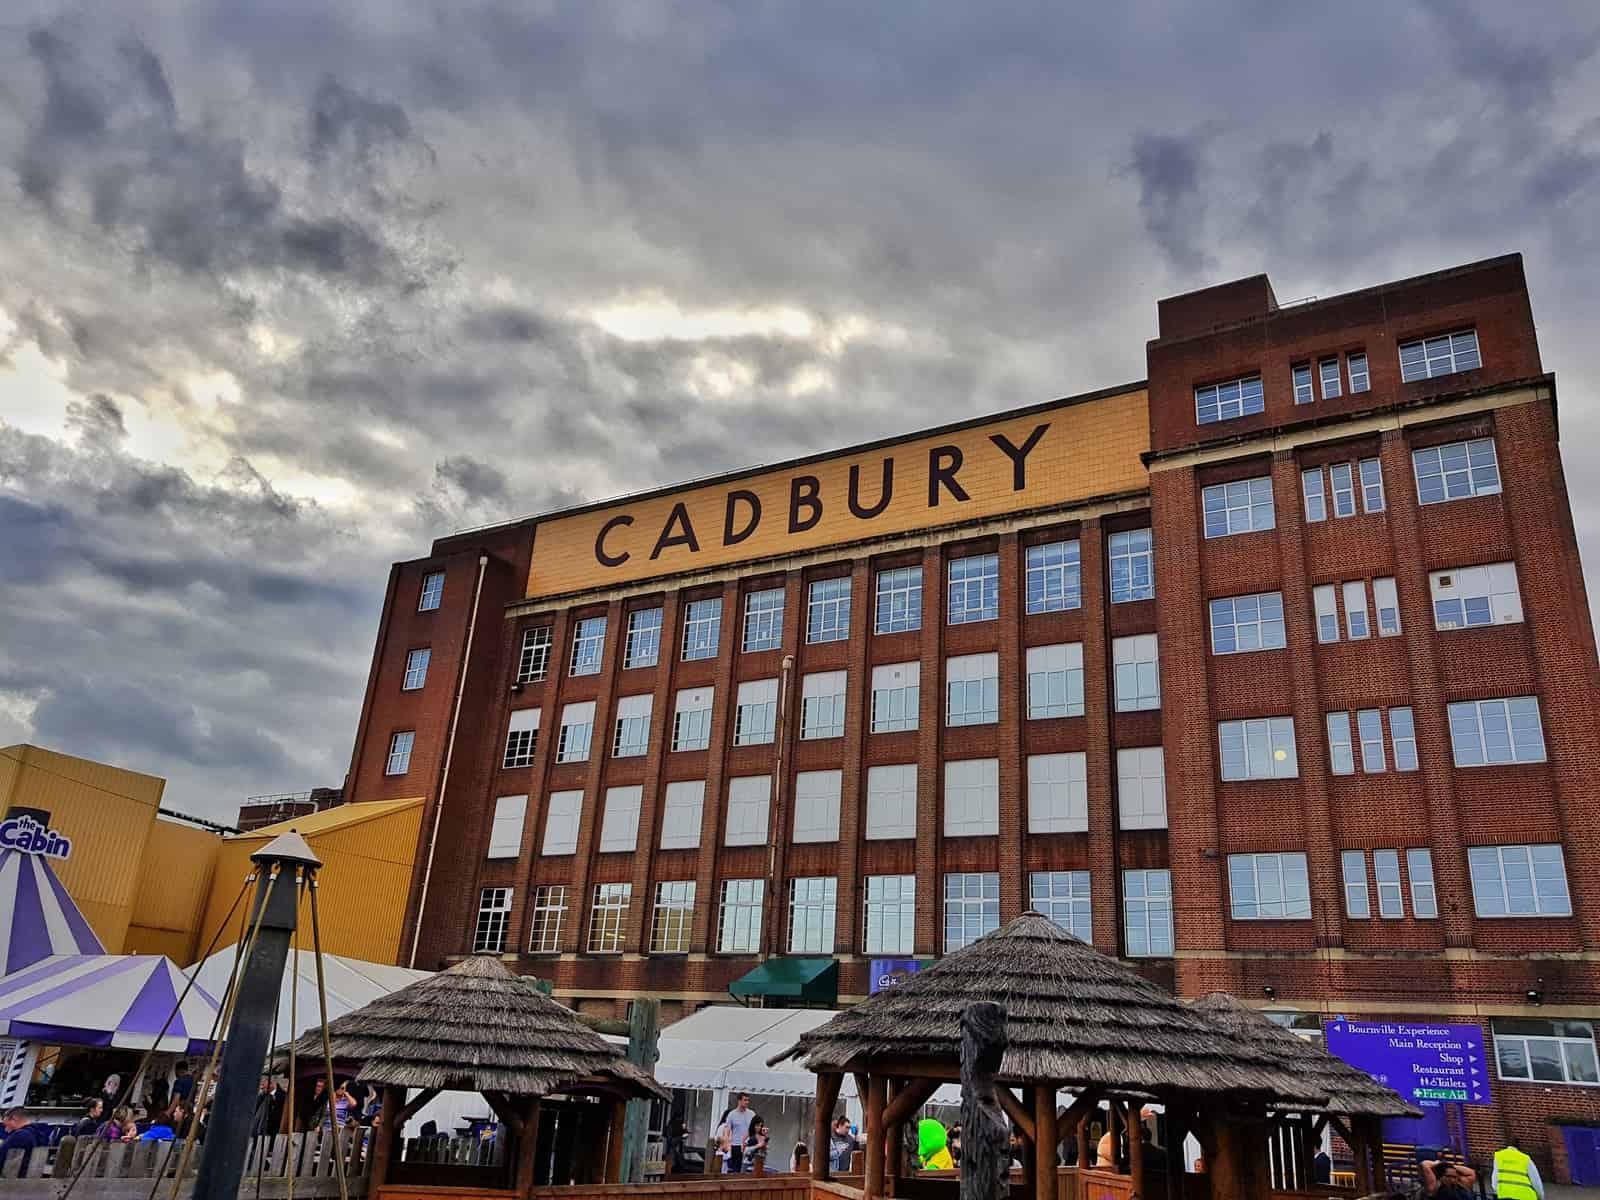 A family day out at Cadbury World Birmingham